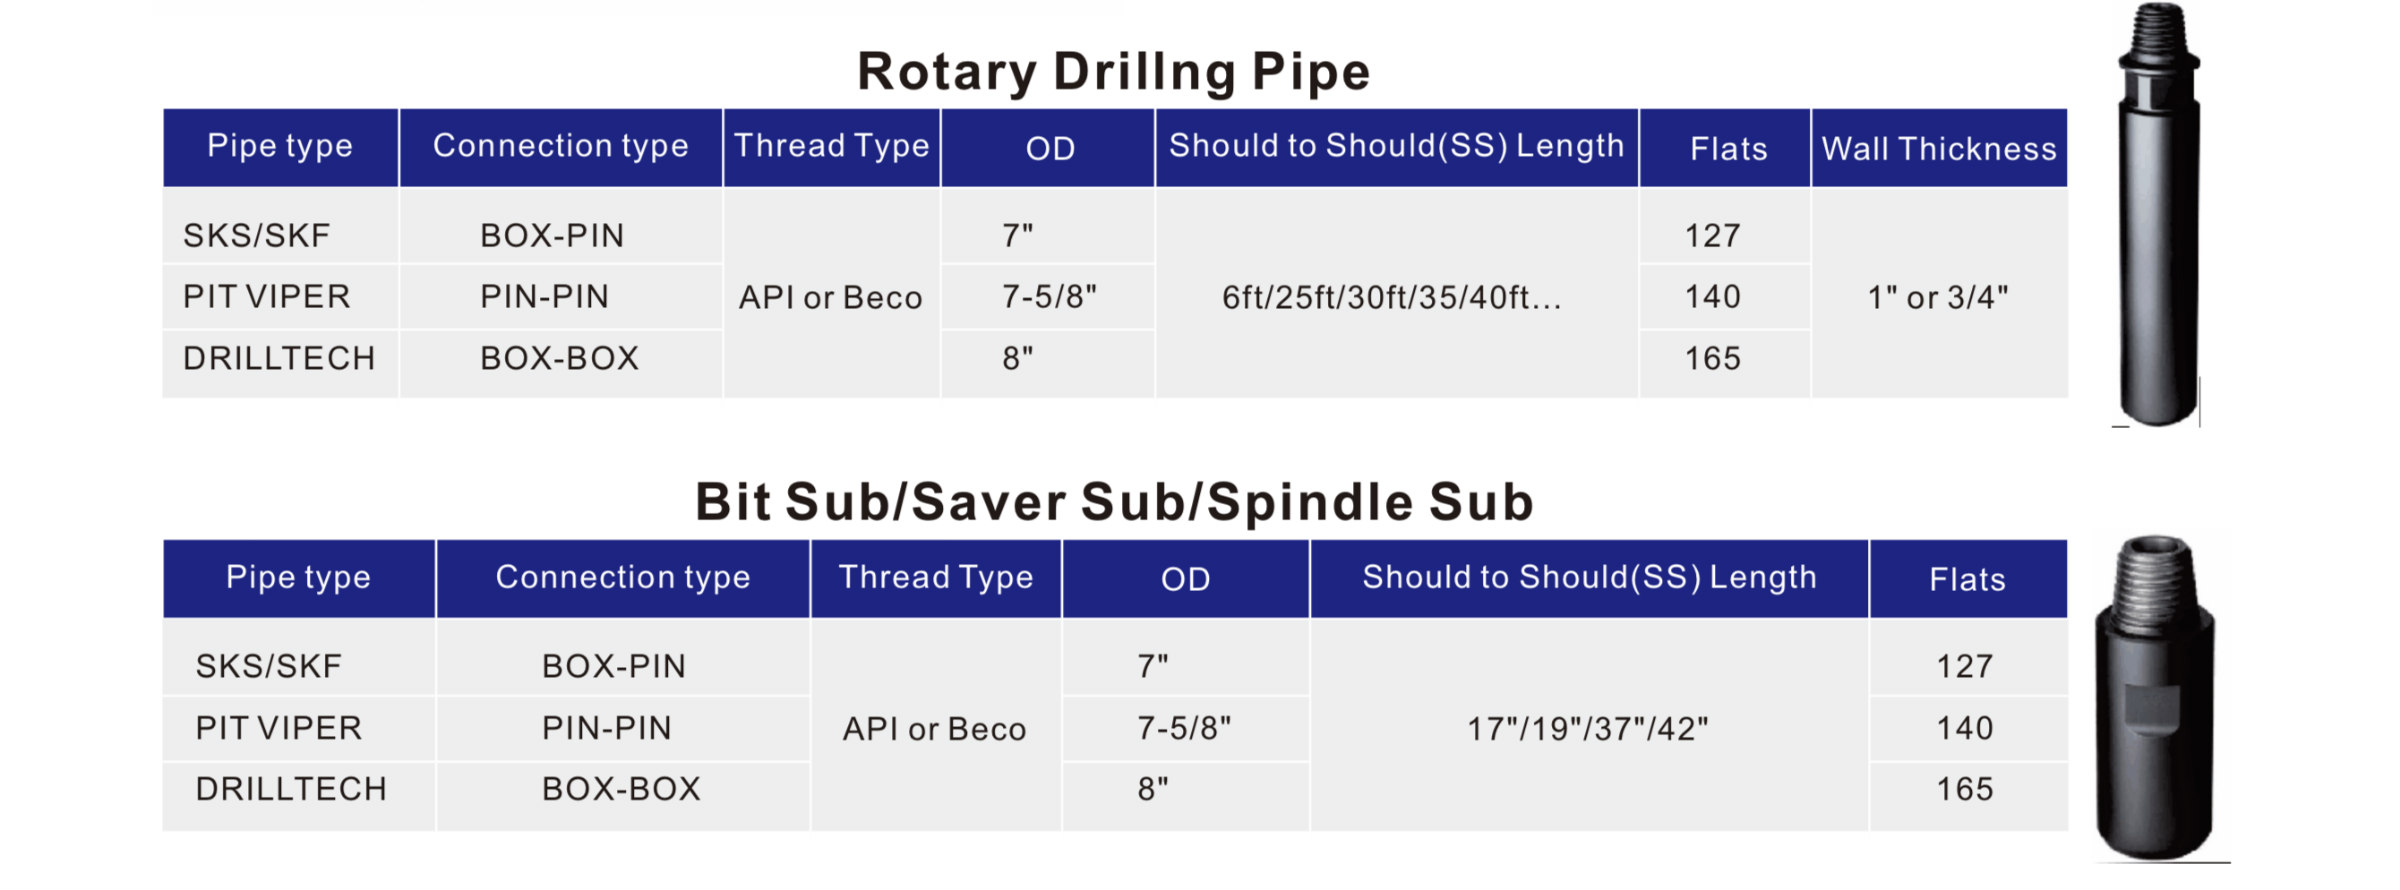 Black Diamond Rotary Drilling Pipe and Subs specifications